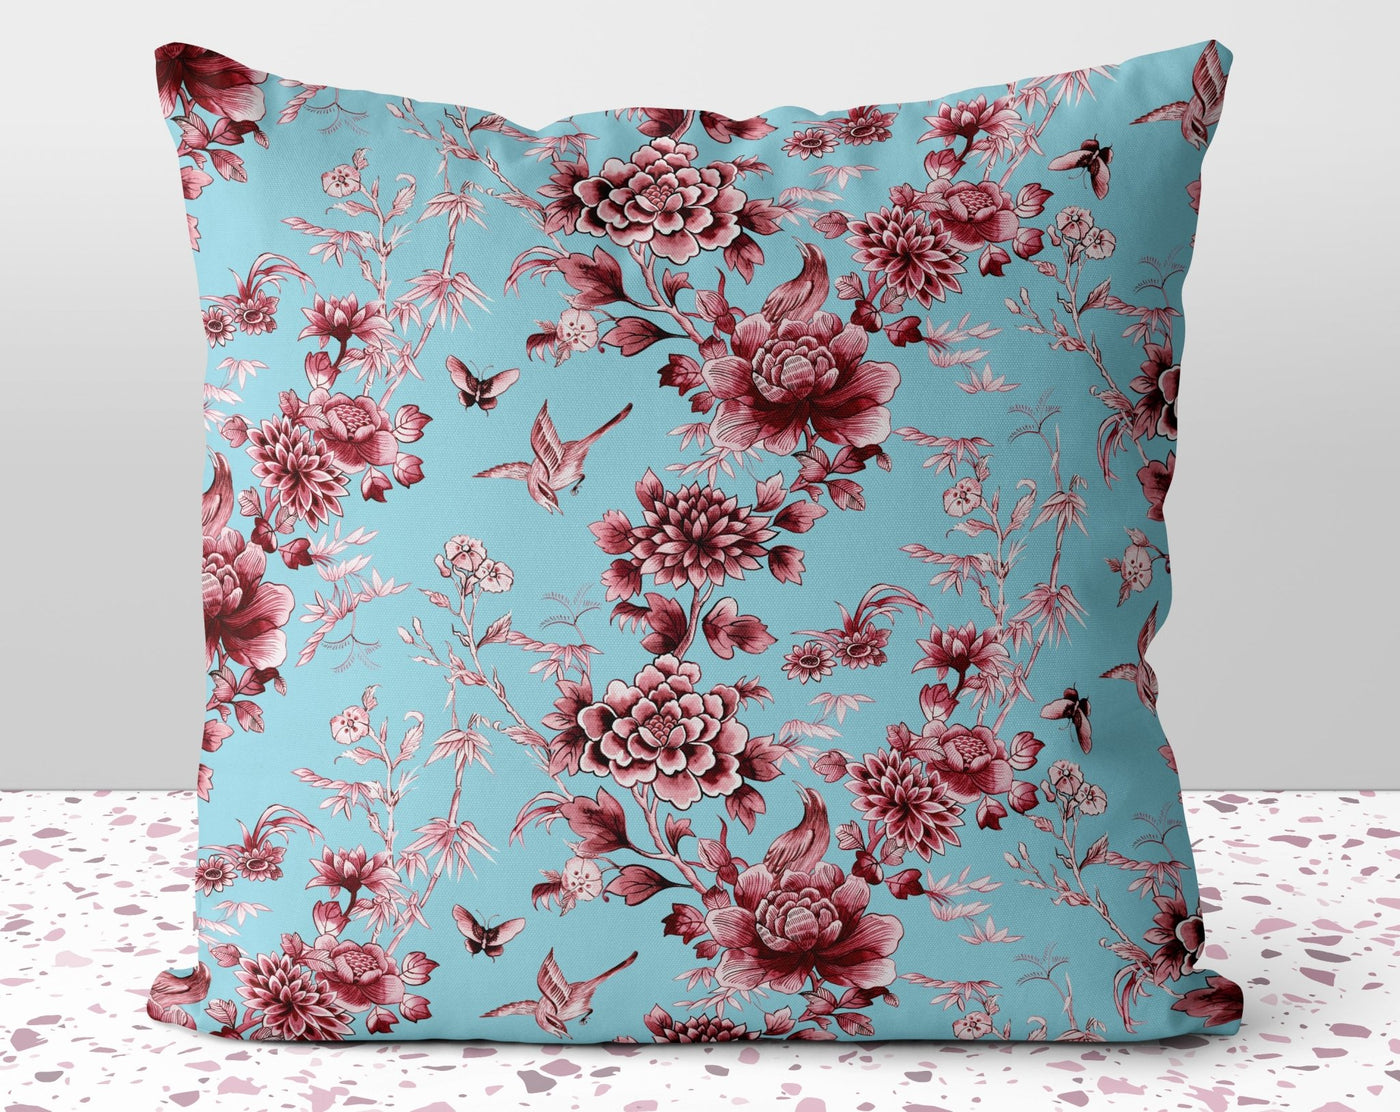 Floral Chinoiserie Red Flowers Red on Cyan Teal Blue Pillow Throw Cover with Insert - Cush Potato Pillows